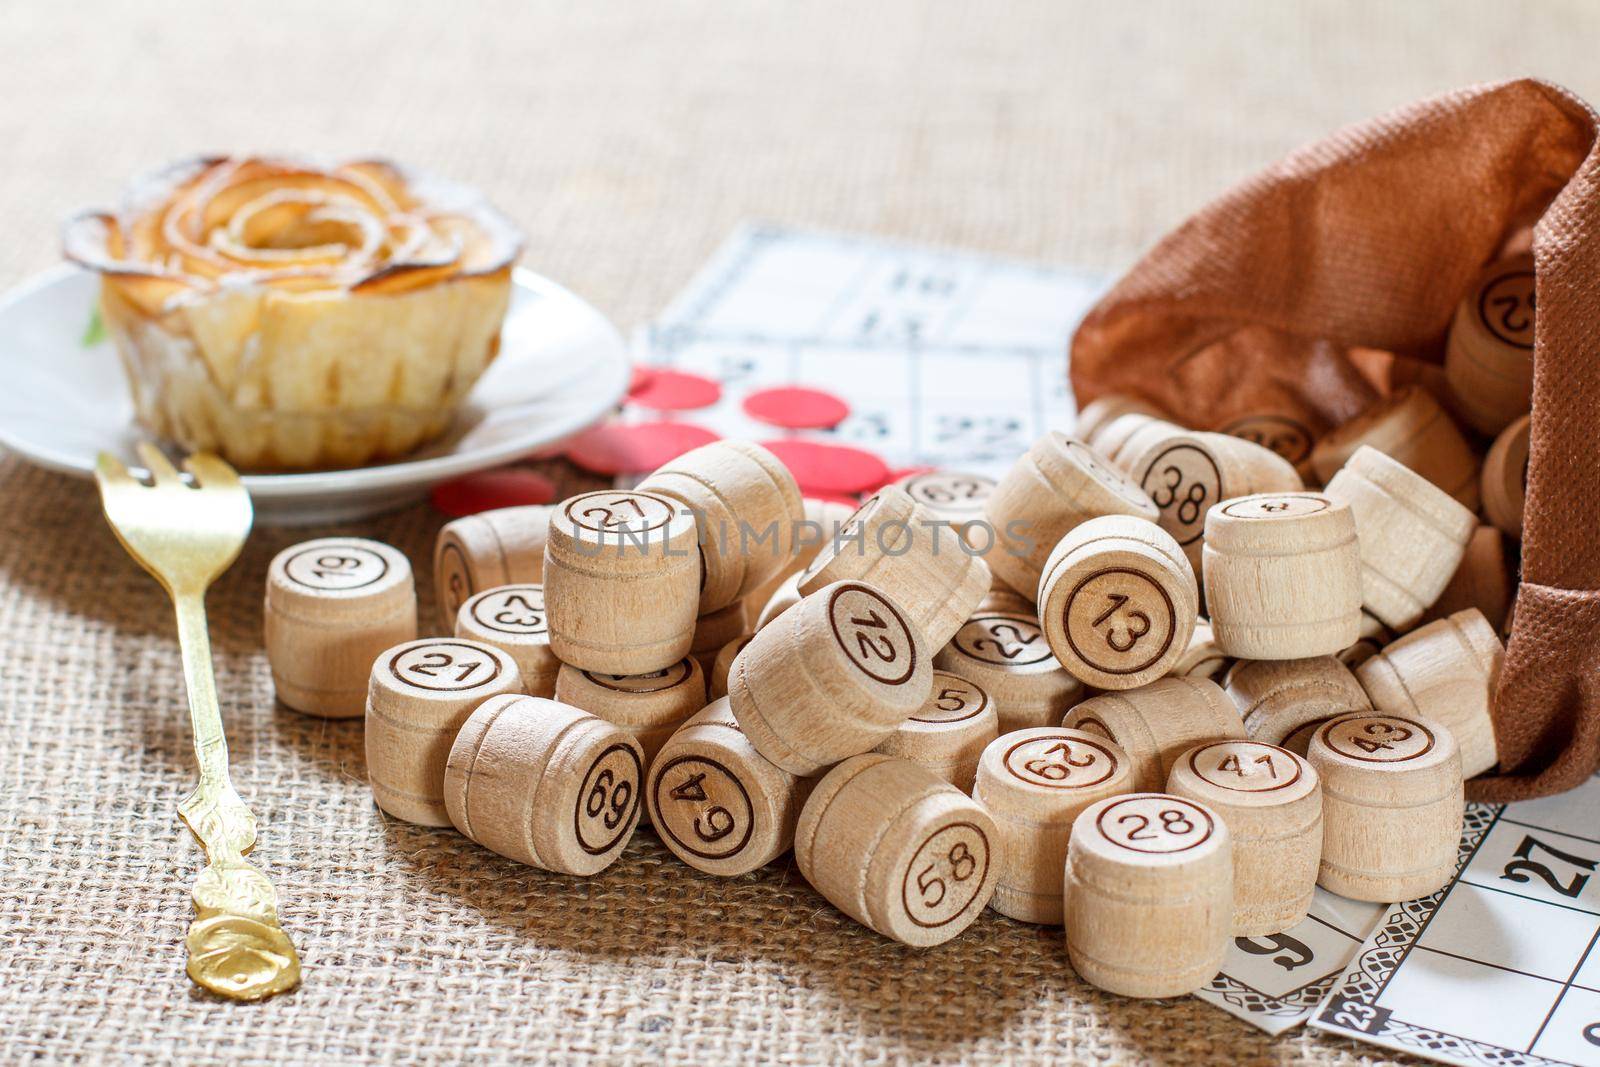 Wooden lotto barrels in brown pouch and game cards for a game in lotto with homemade biscuit in the form of rose on white saucer with fork on the background. Selective focus on barrels